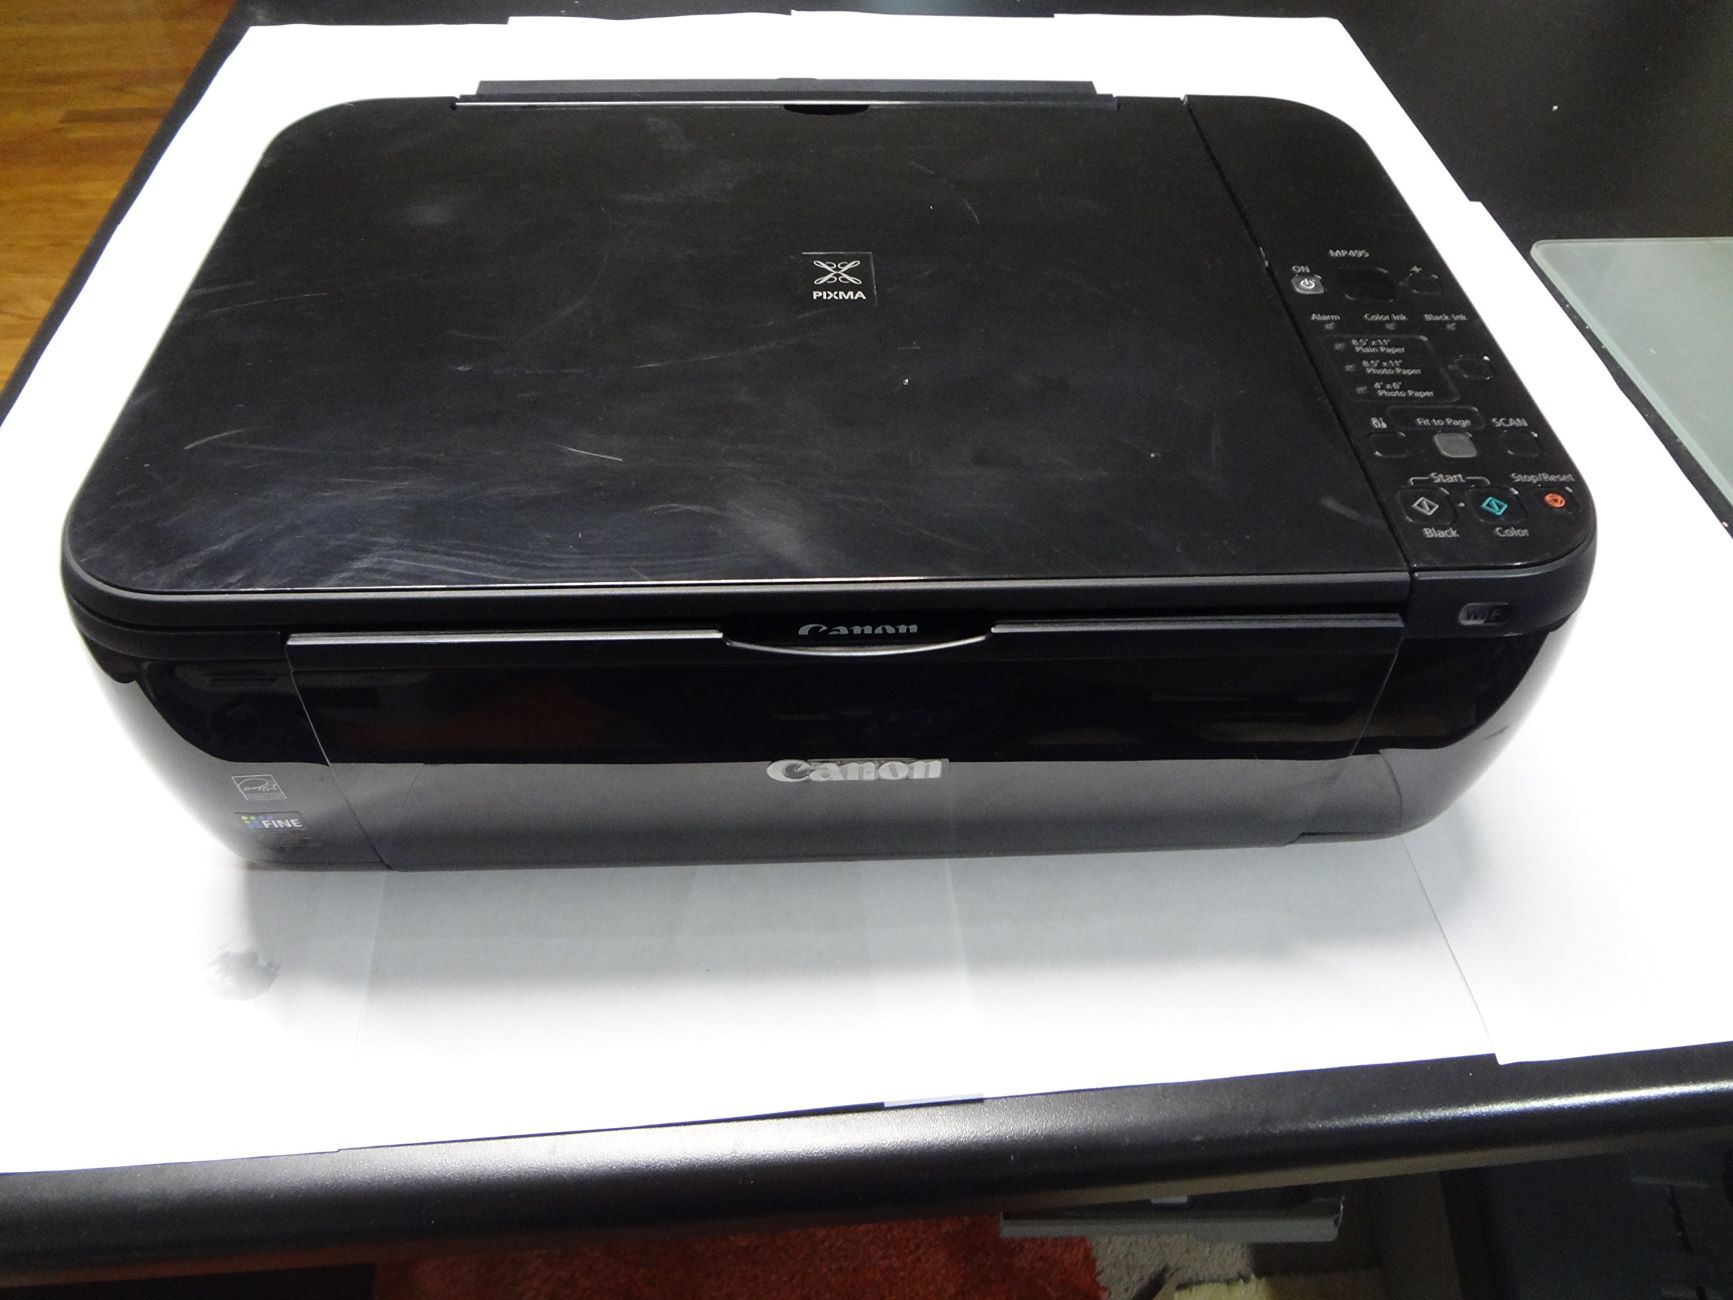 How To Set Up Canon MP495 Wireless Printer Without CD